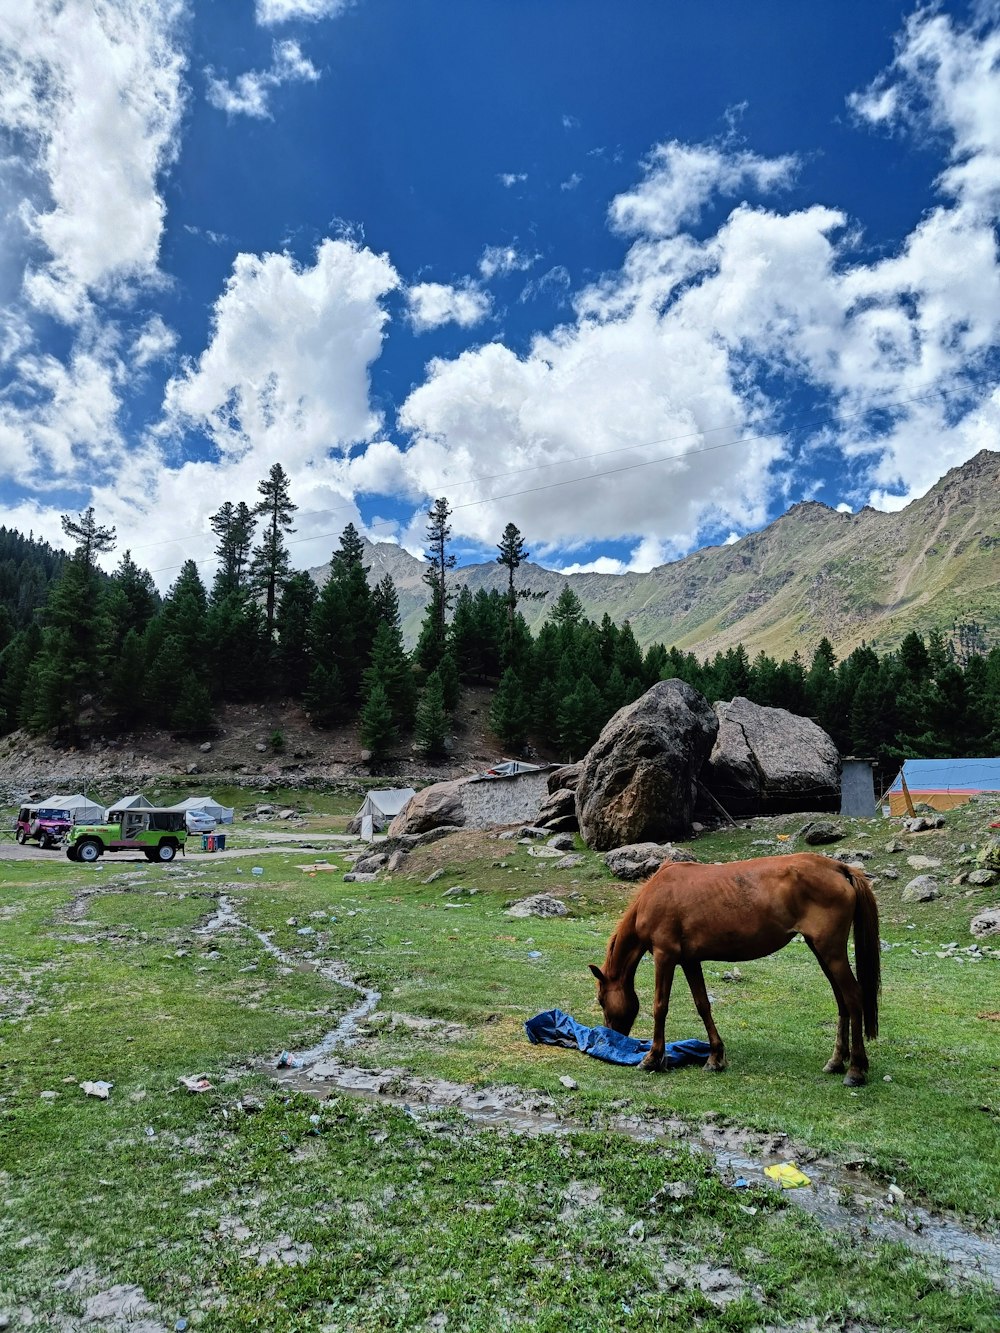 a horse eating grass in a field with mountains in the background